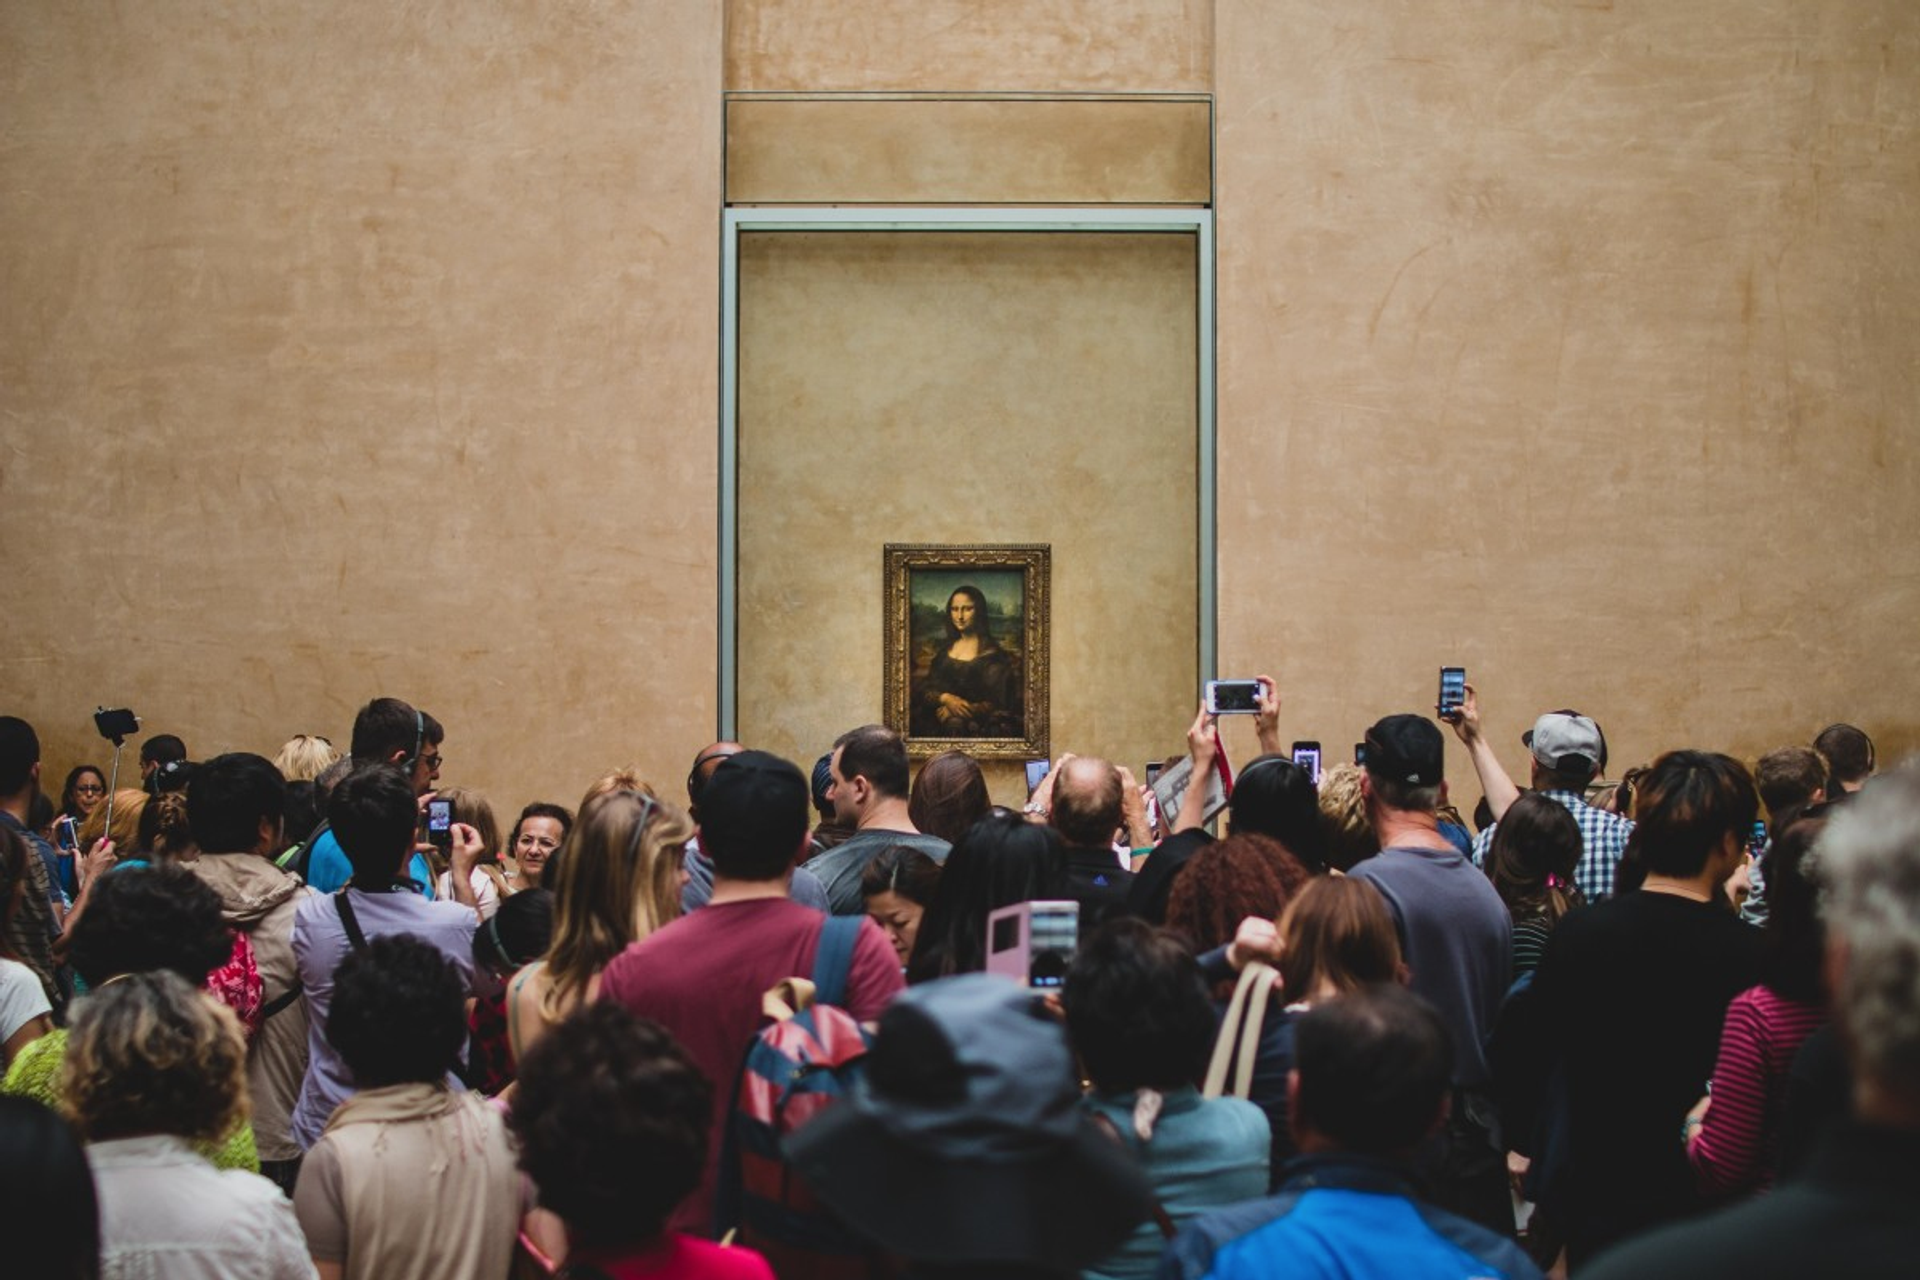 Interior view of The Louvre Museum. A crown of people taking photographs of the Mona Lisa